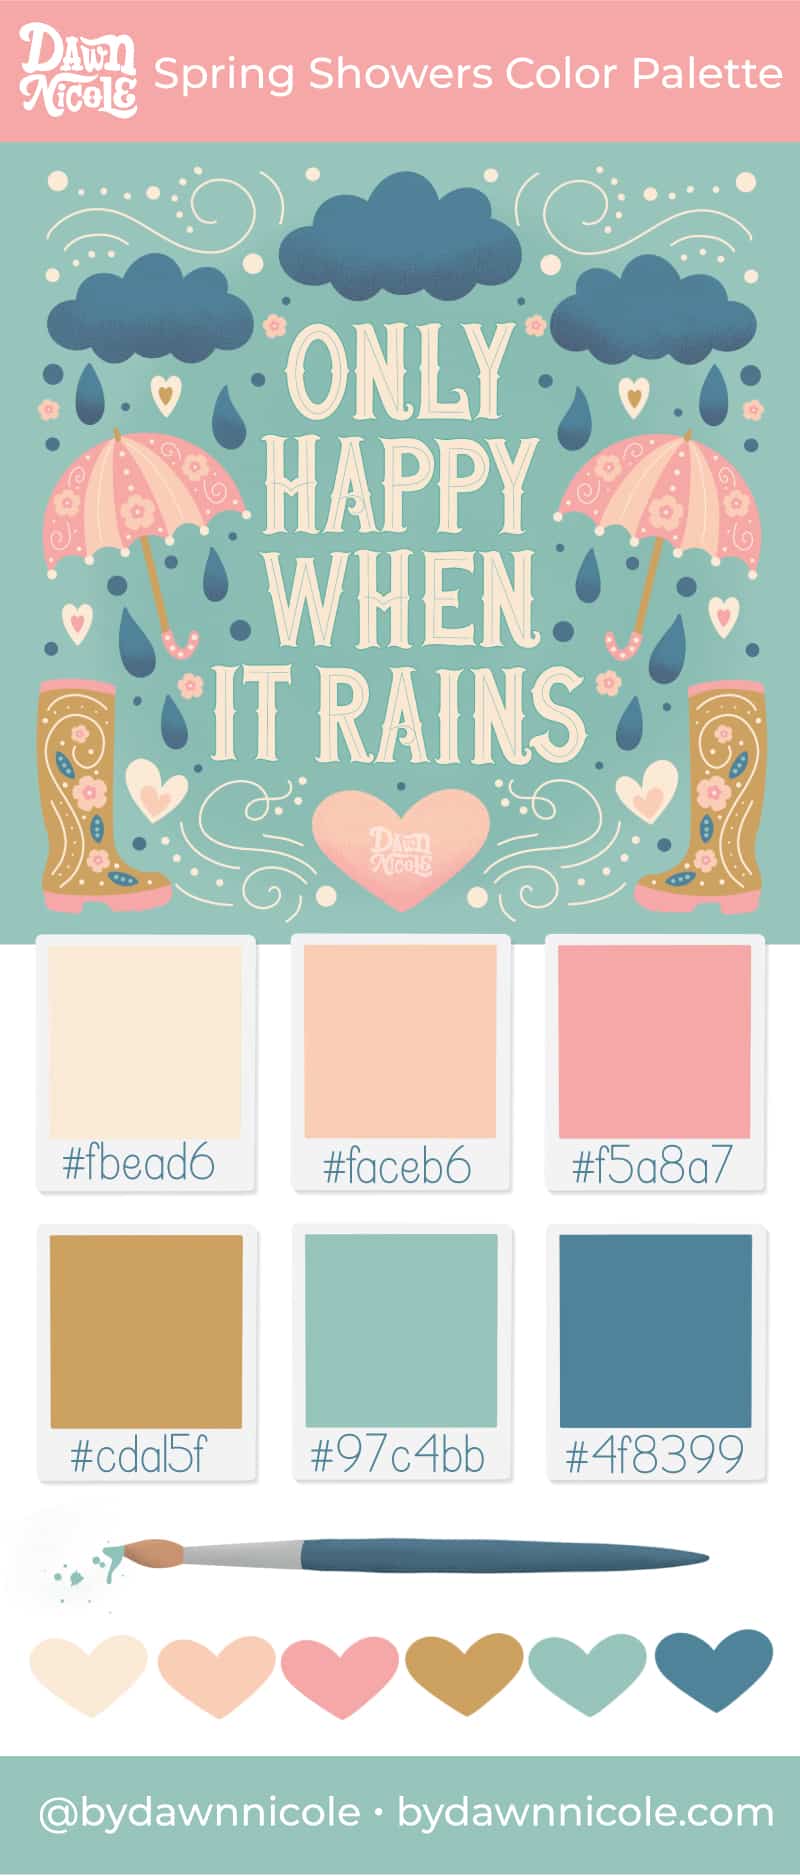 Spring Showers Color Palette. Grab the pretty color palette I used for my "Only Happy When it Rains" artwork!